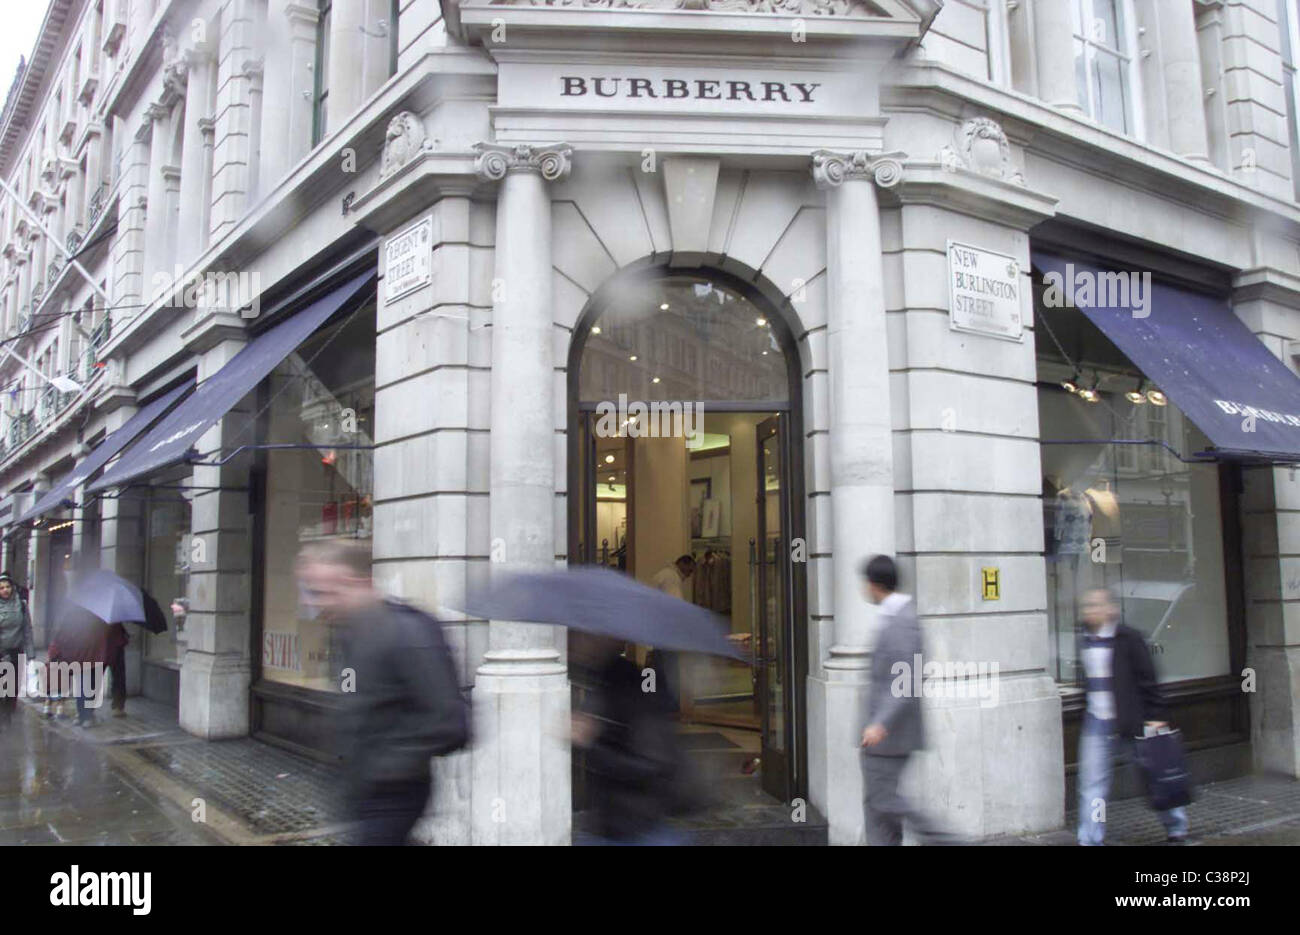 burberry central london